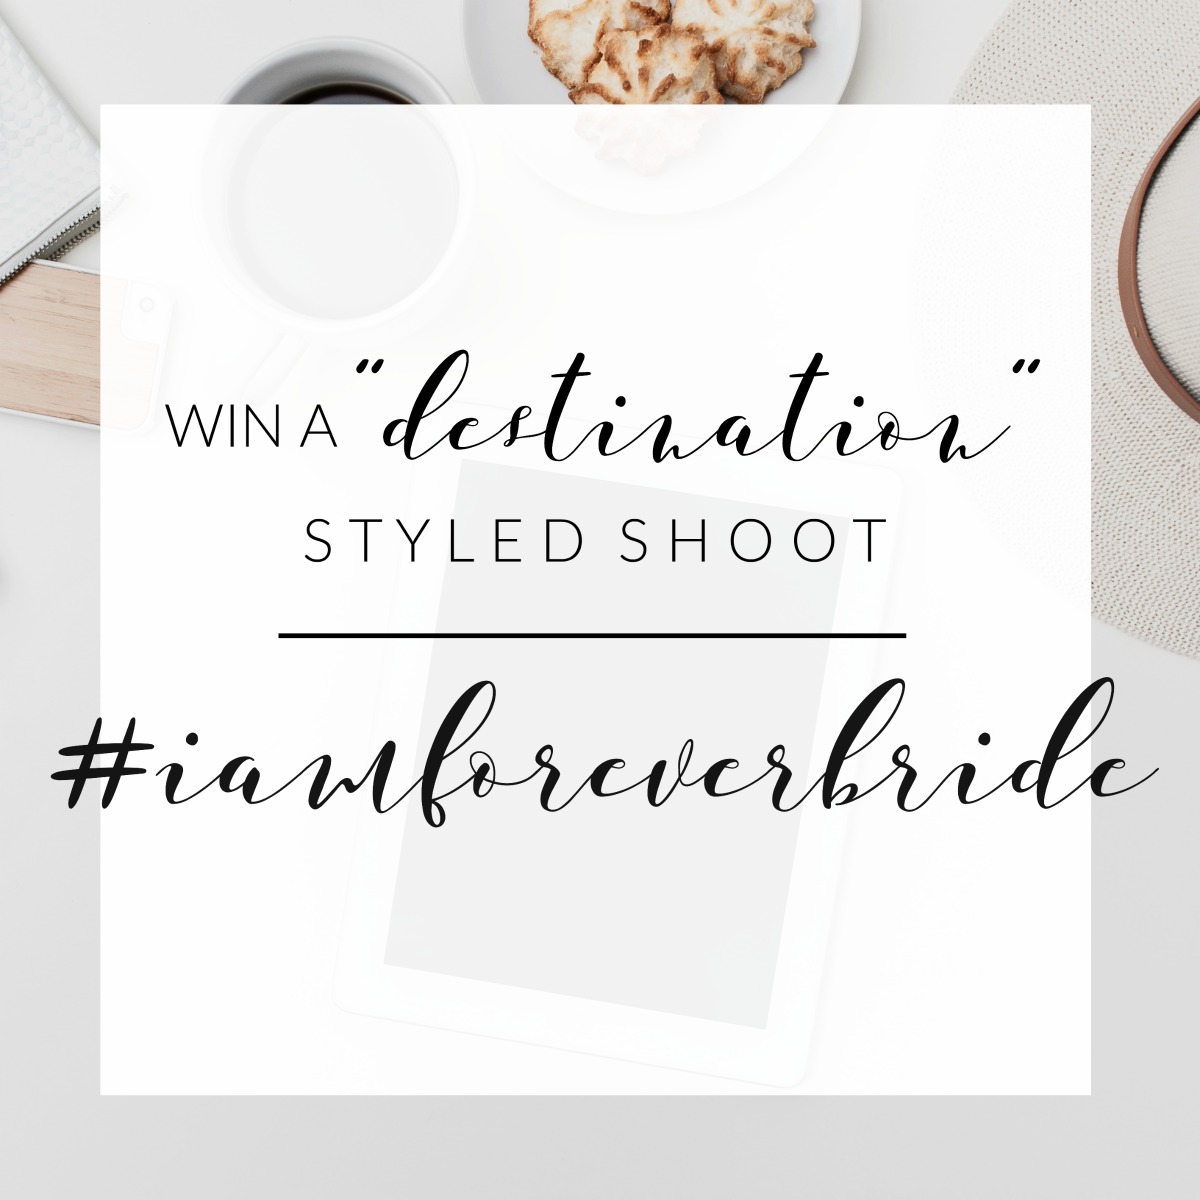 Win a Forever Bride “Destination” Styled Shoot!